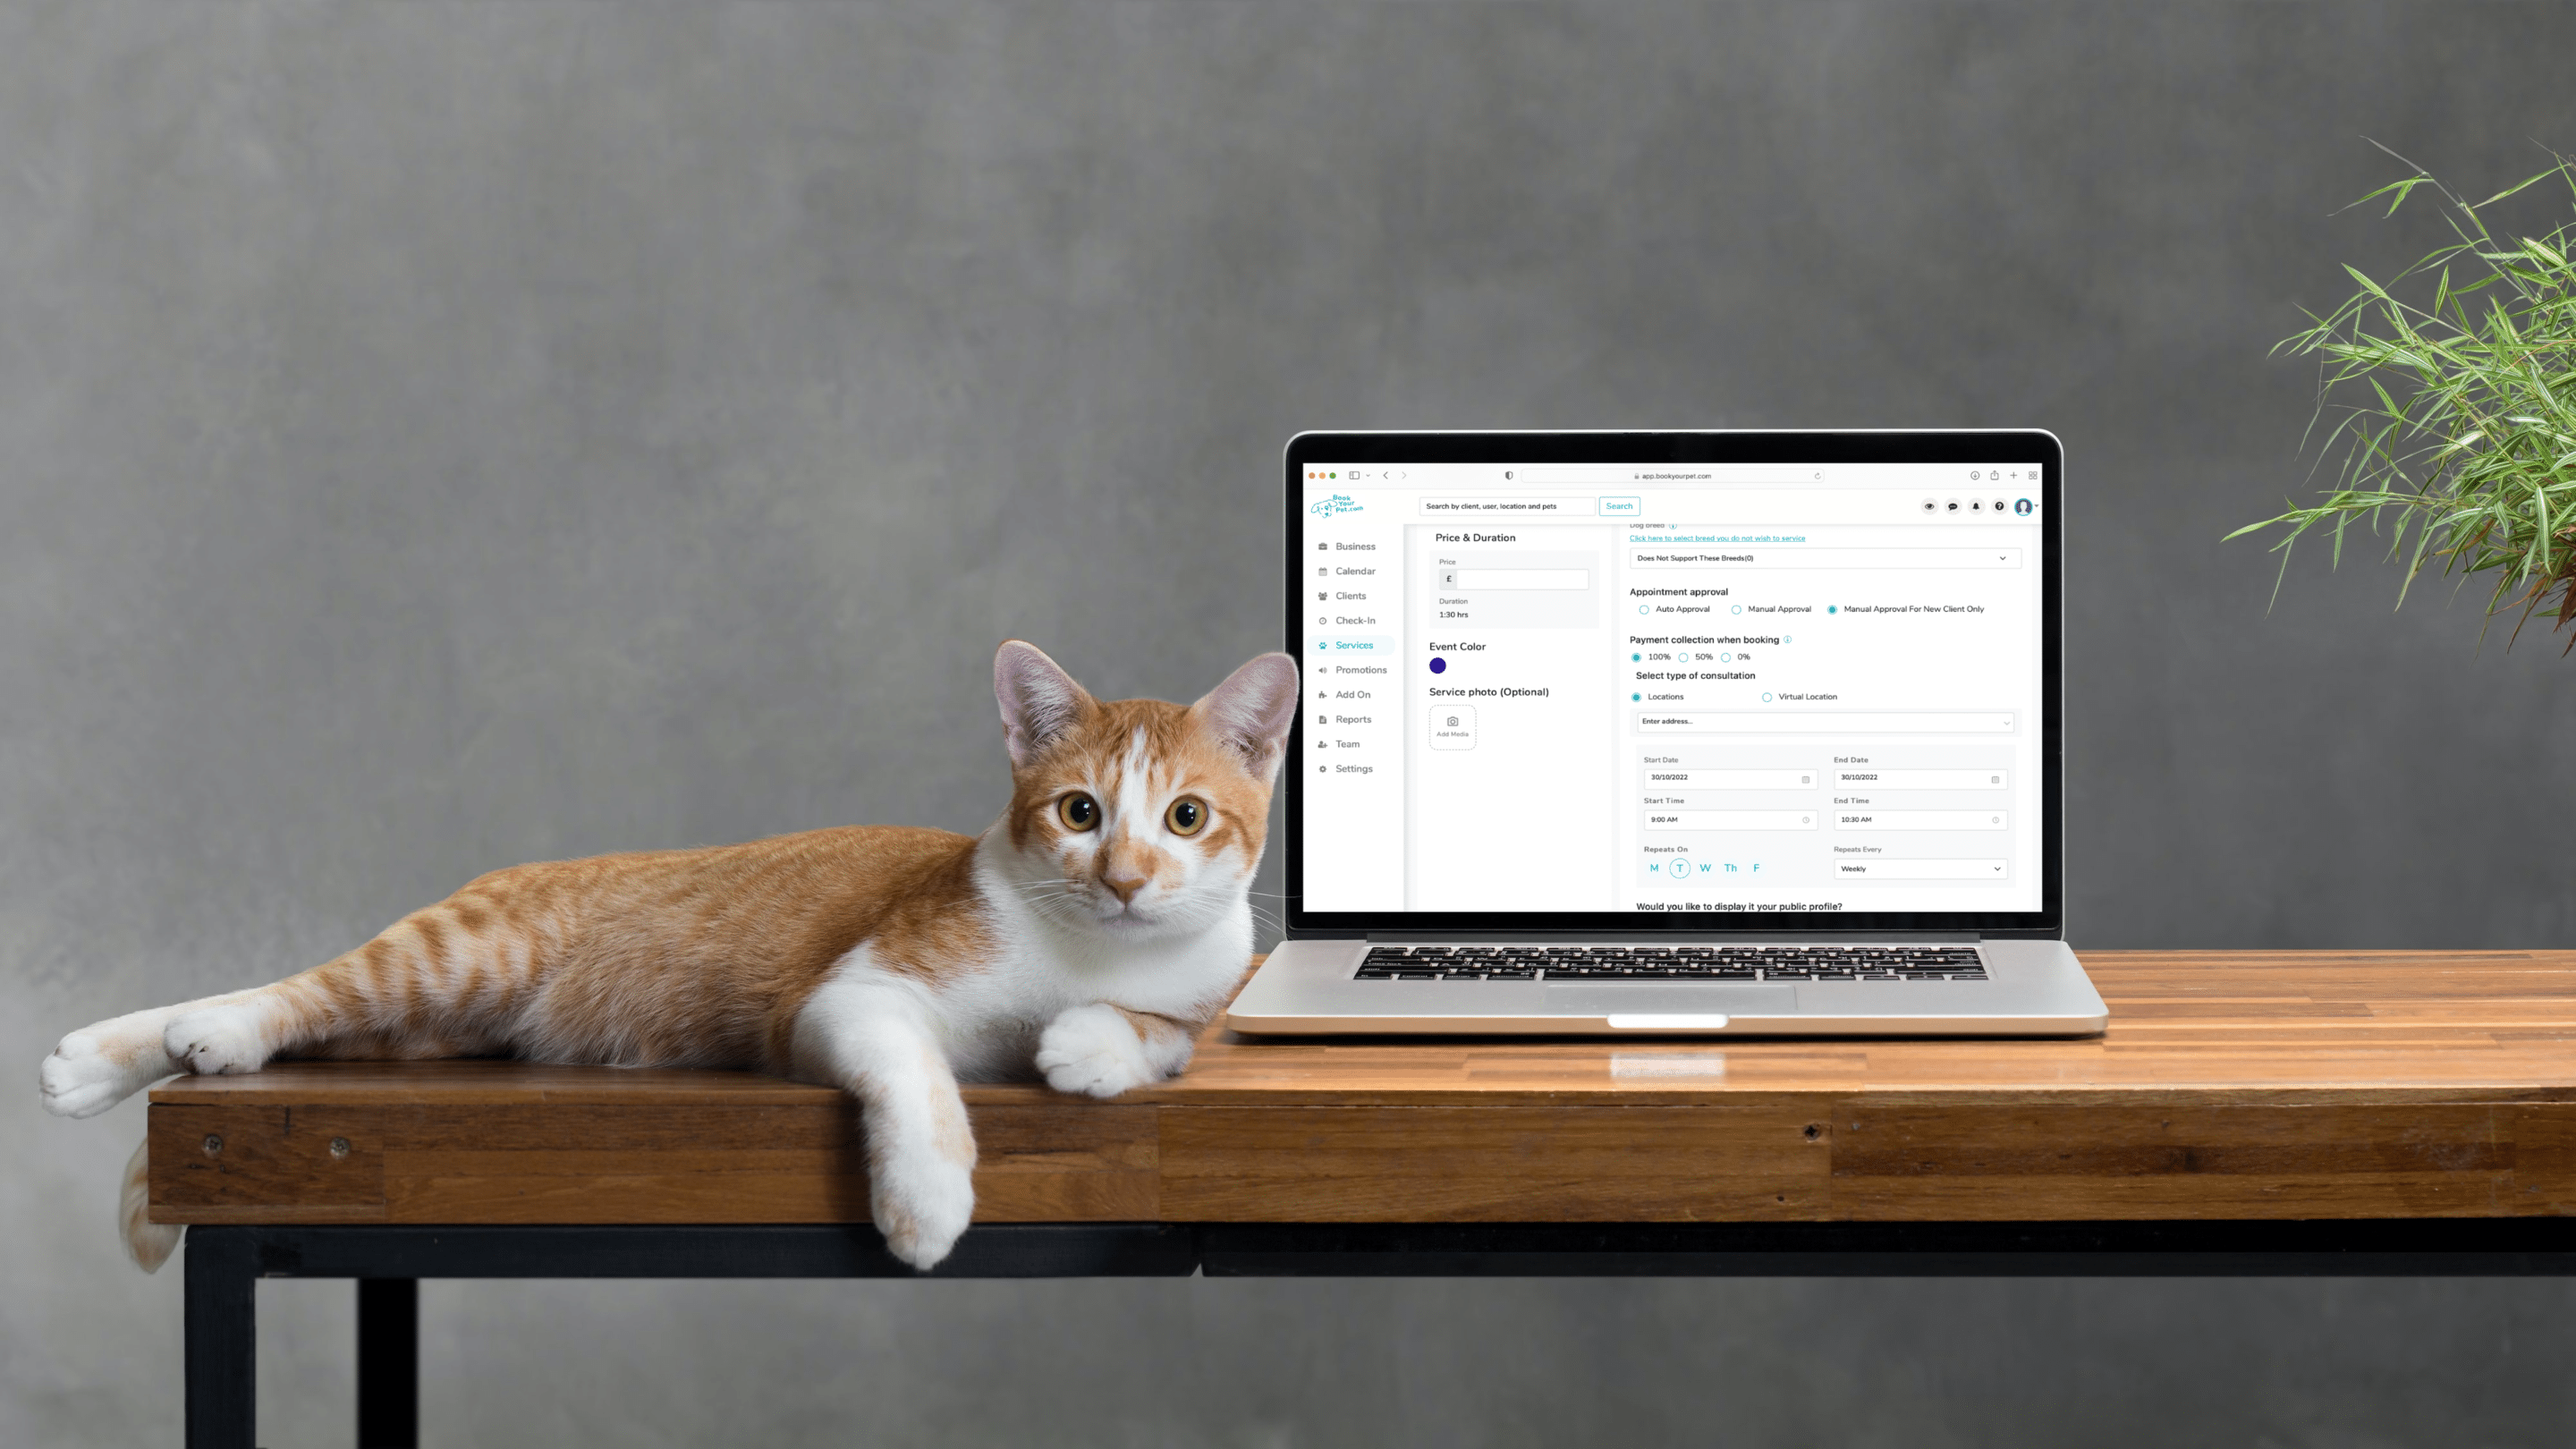 An image of a ginger and white cat laying across a wood table next to a laptop showing the Book Your Pet pet business software.